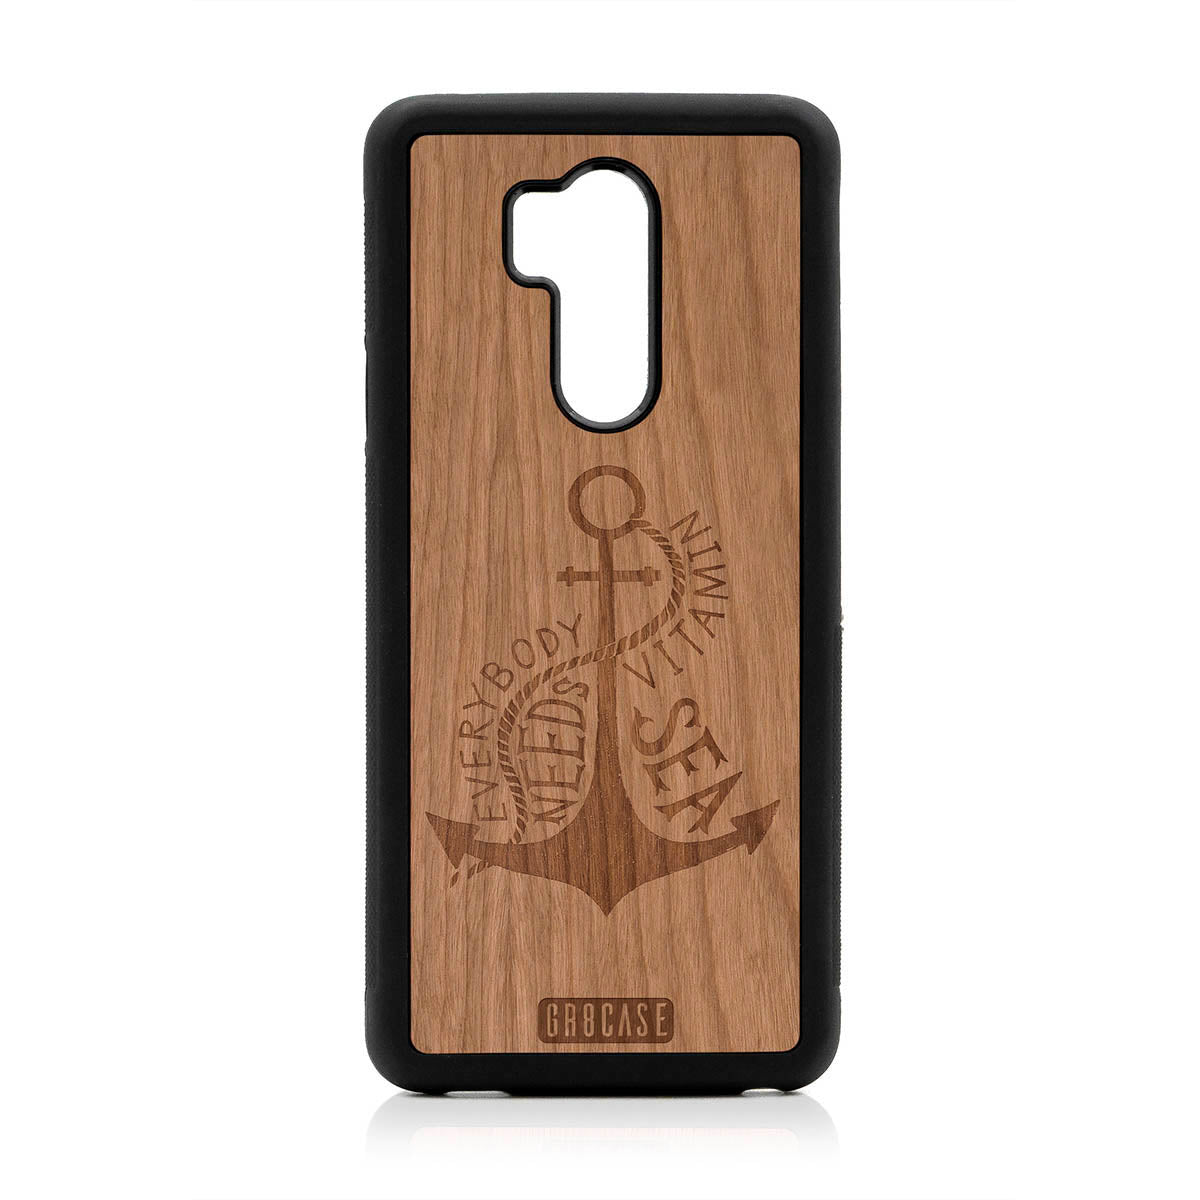 Everybody Needs Vitamin Sea (Anchor) Design Wood Case For LG G7 ThinQ by GR8CASE